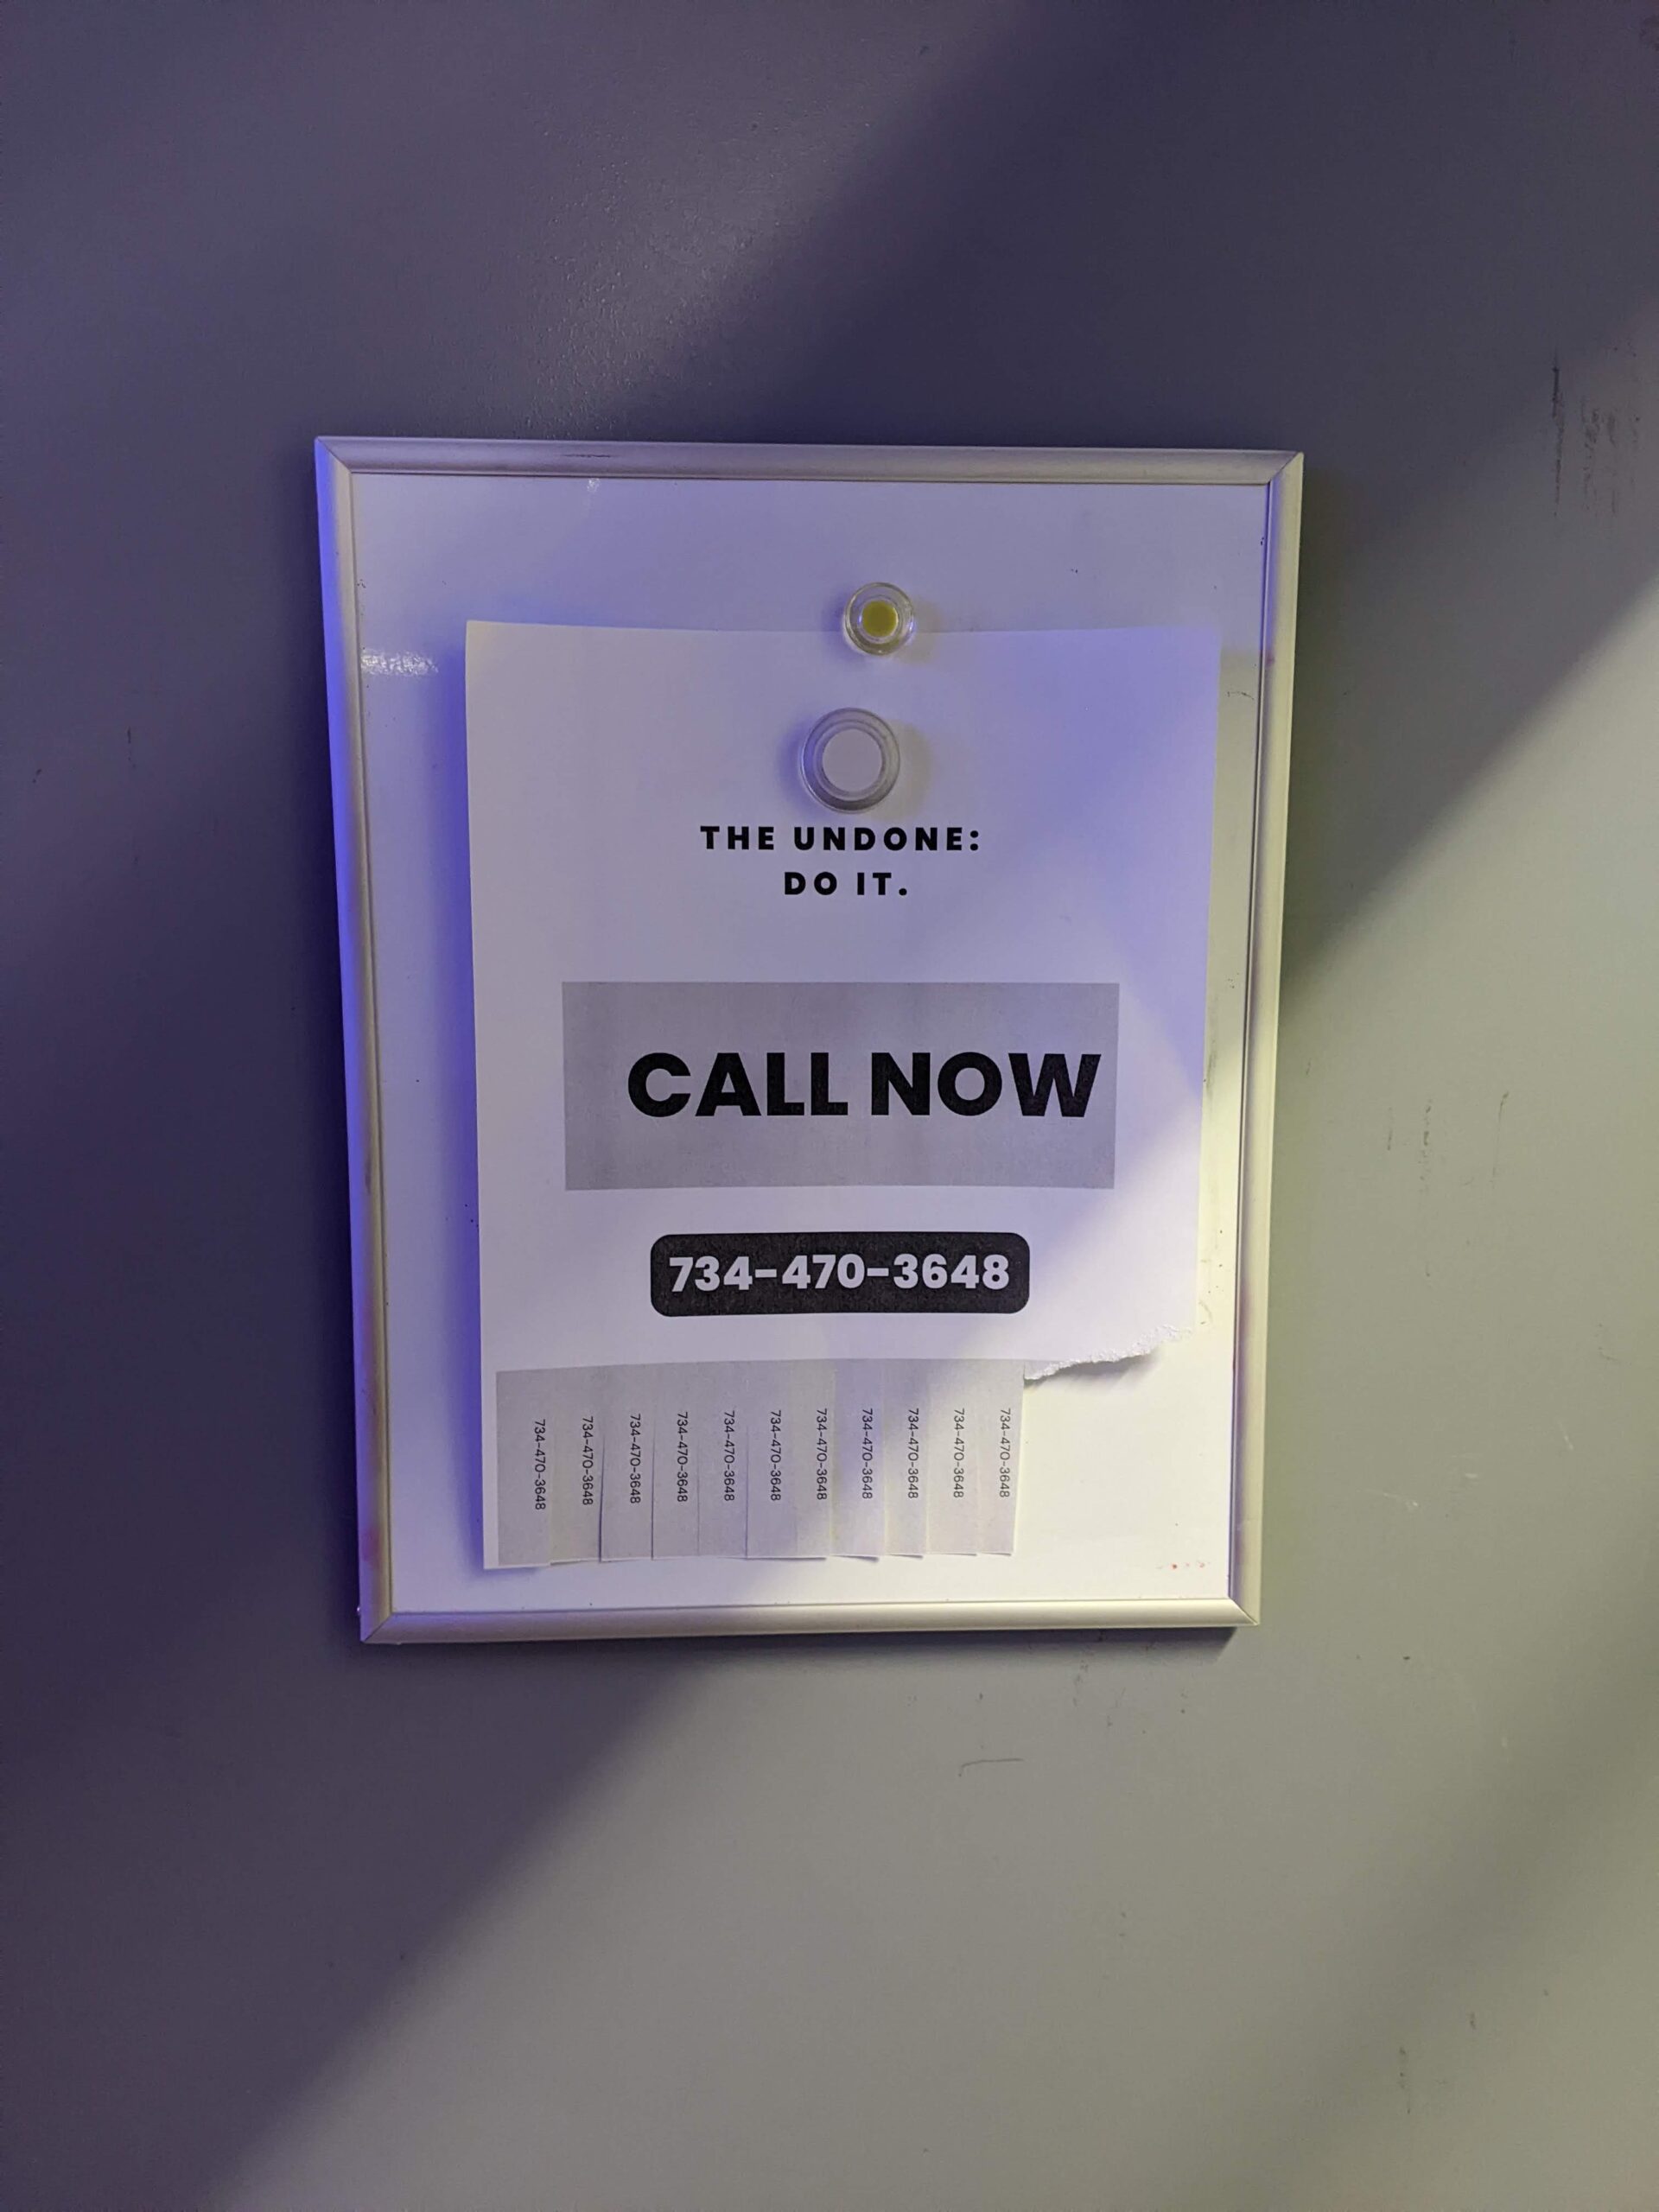 Paper with words "Call Now" and number pinned on canvas